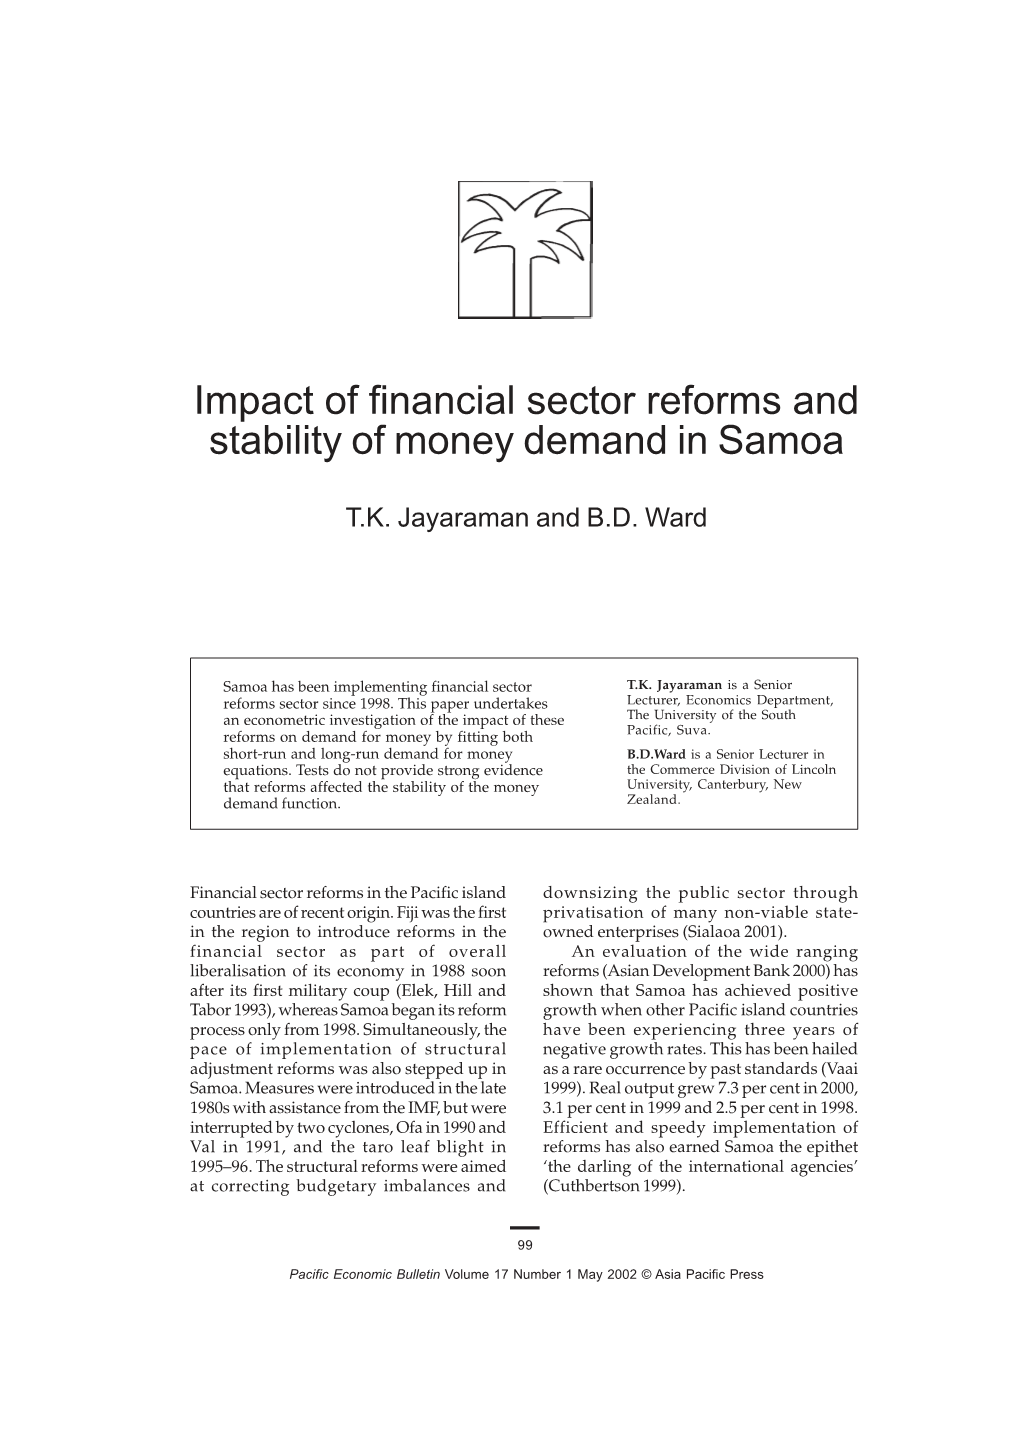 Impact of Financial Sector Reforms and Stability of Money Demand in Samoa